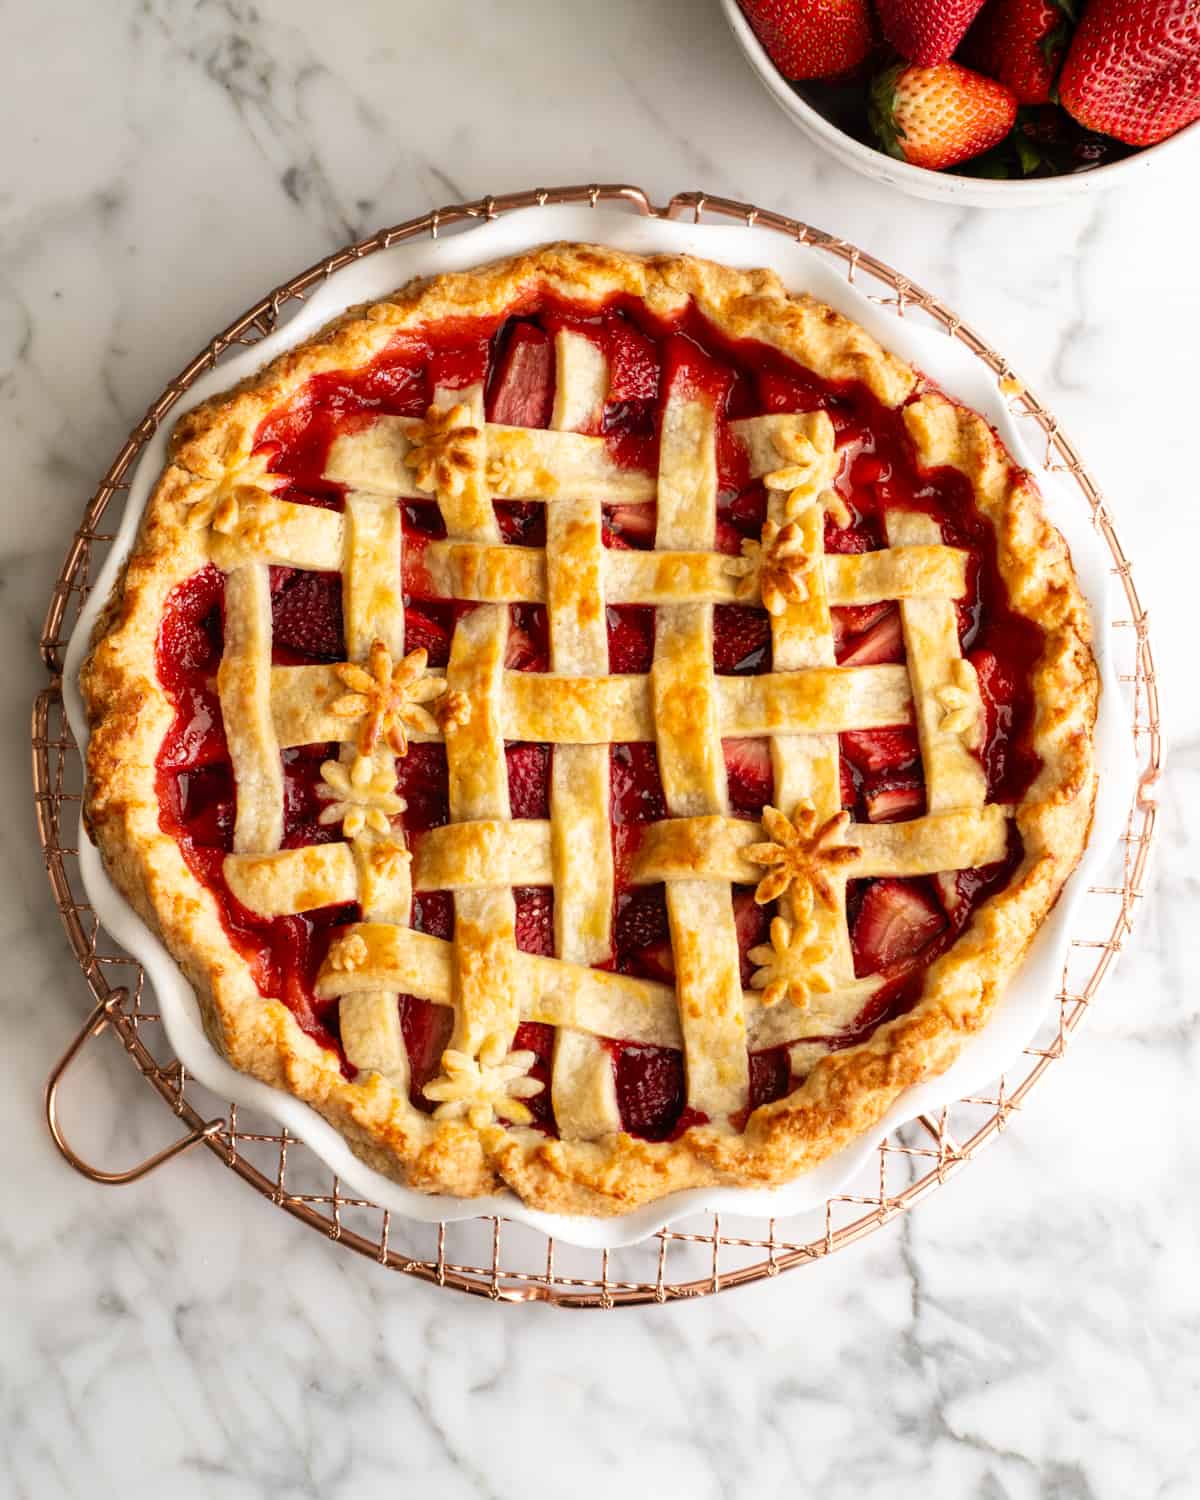 baked strawberry pie on a cooling rack after baking